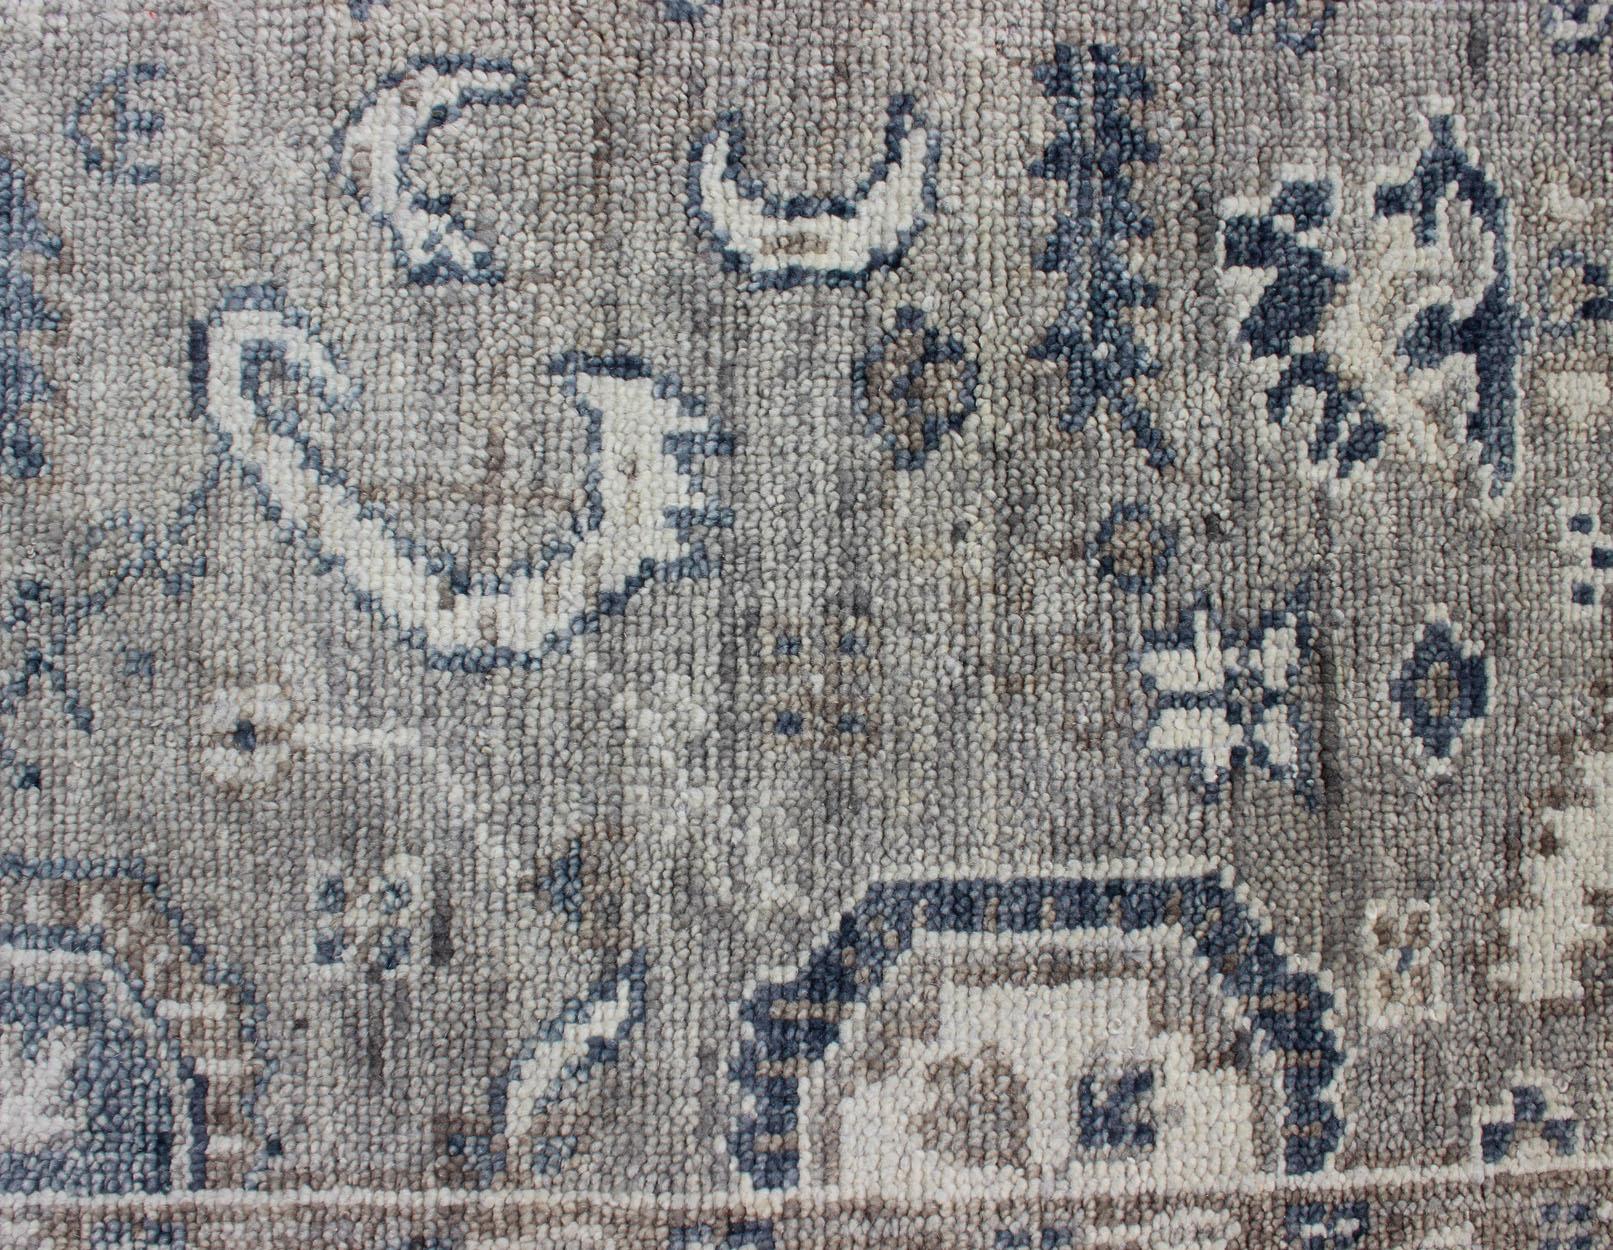 Hand-Knotted Indian Wool Oushak Rug in Cool Neutral Tones. 
 Measures 8'0 x 9'9 
This woven art was hand-knotted in India, where many rug makers take the Turkish Oushak style and recreate it with their own cultural influences. This mature piece